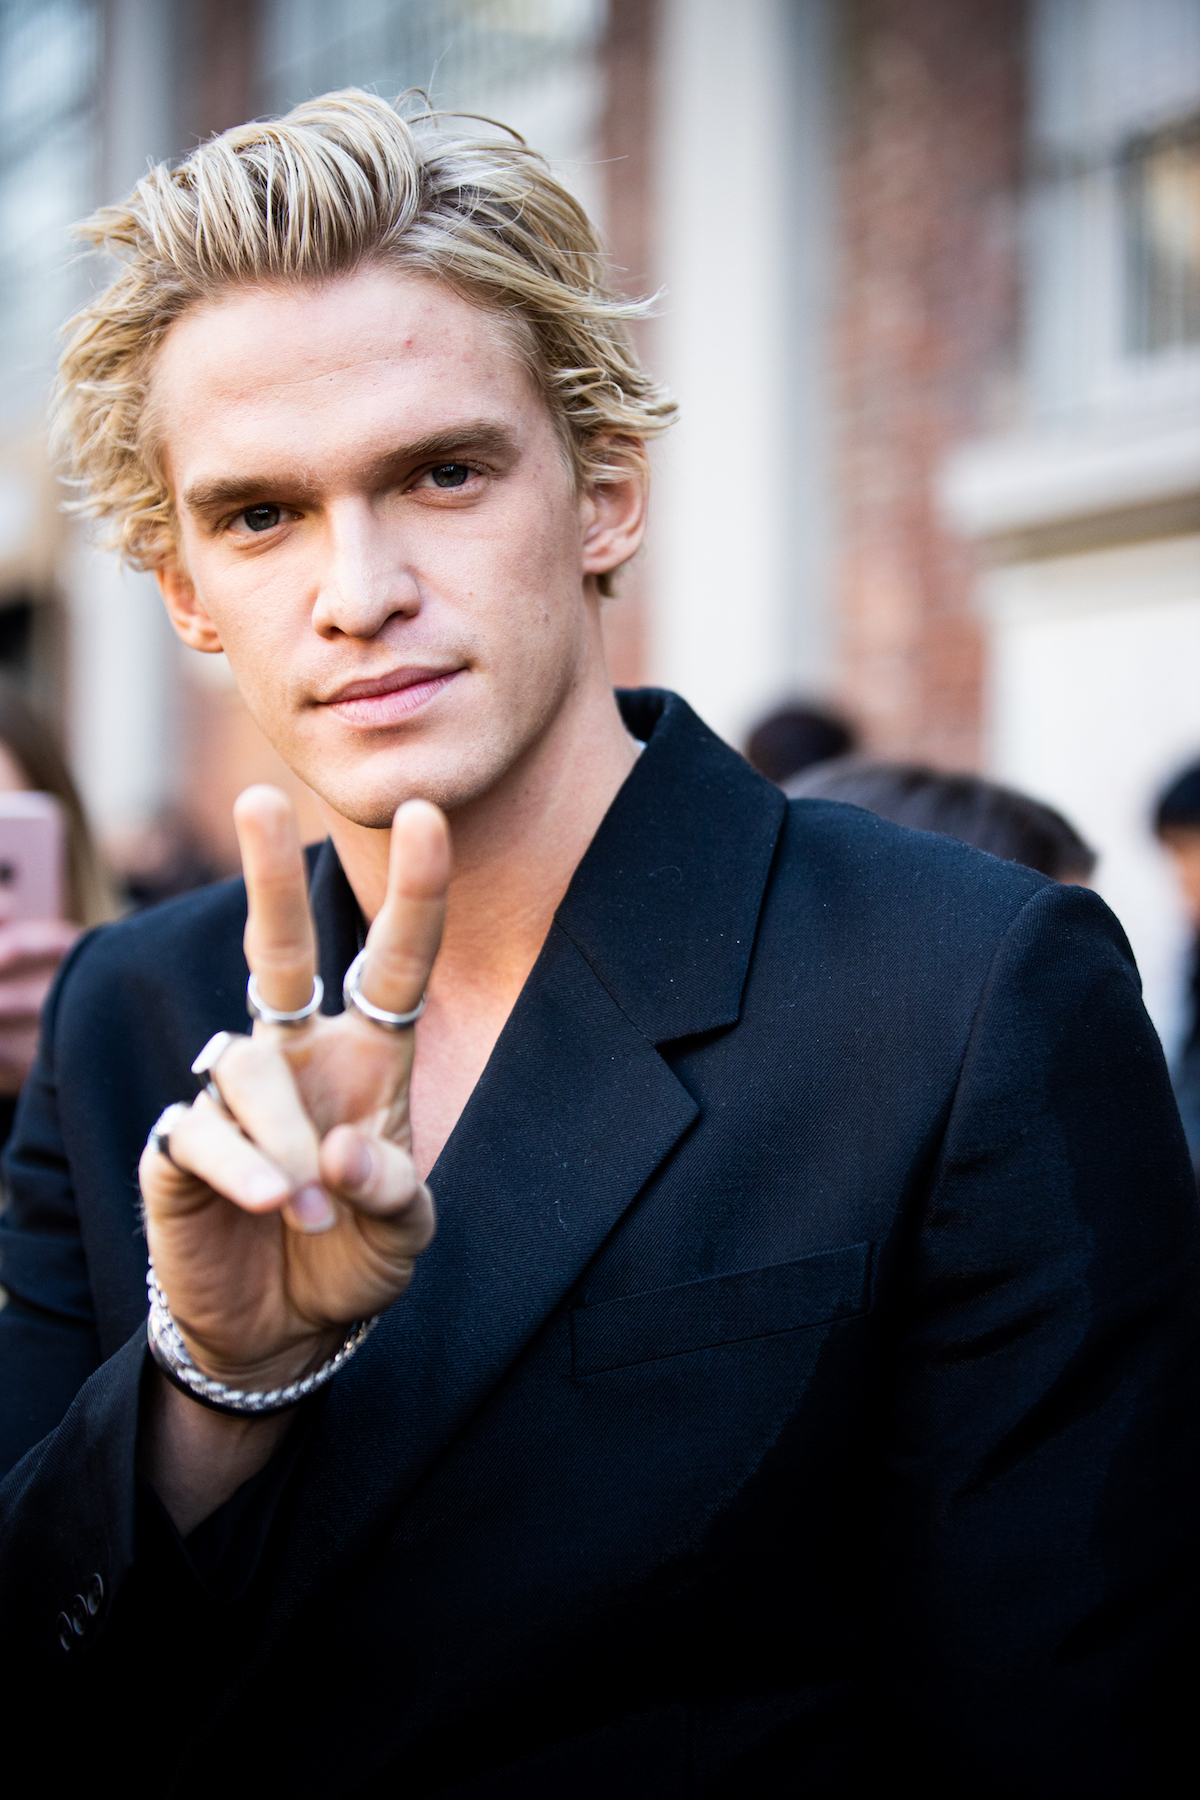 Cody Simpson in a black jacket smiles and flashes a peace sign at the camera.